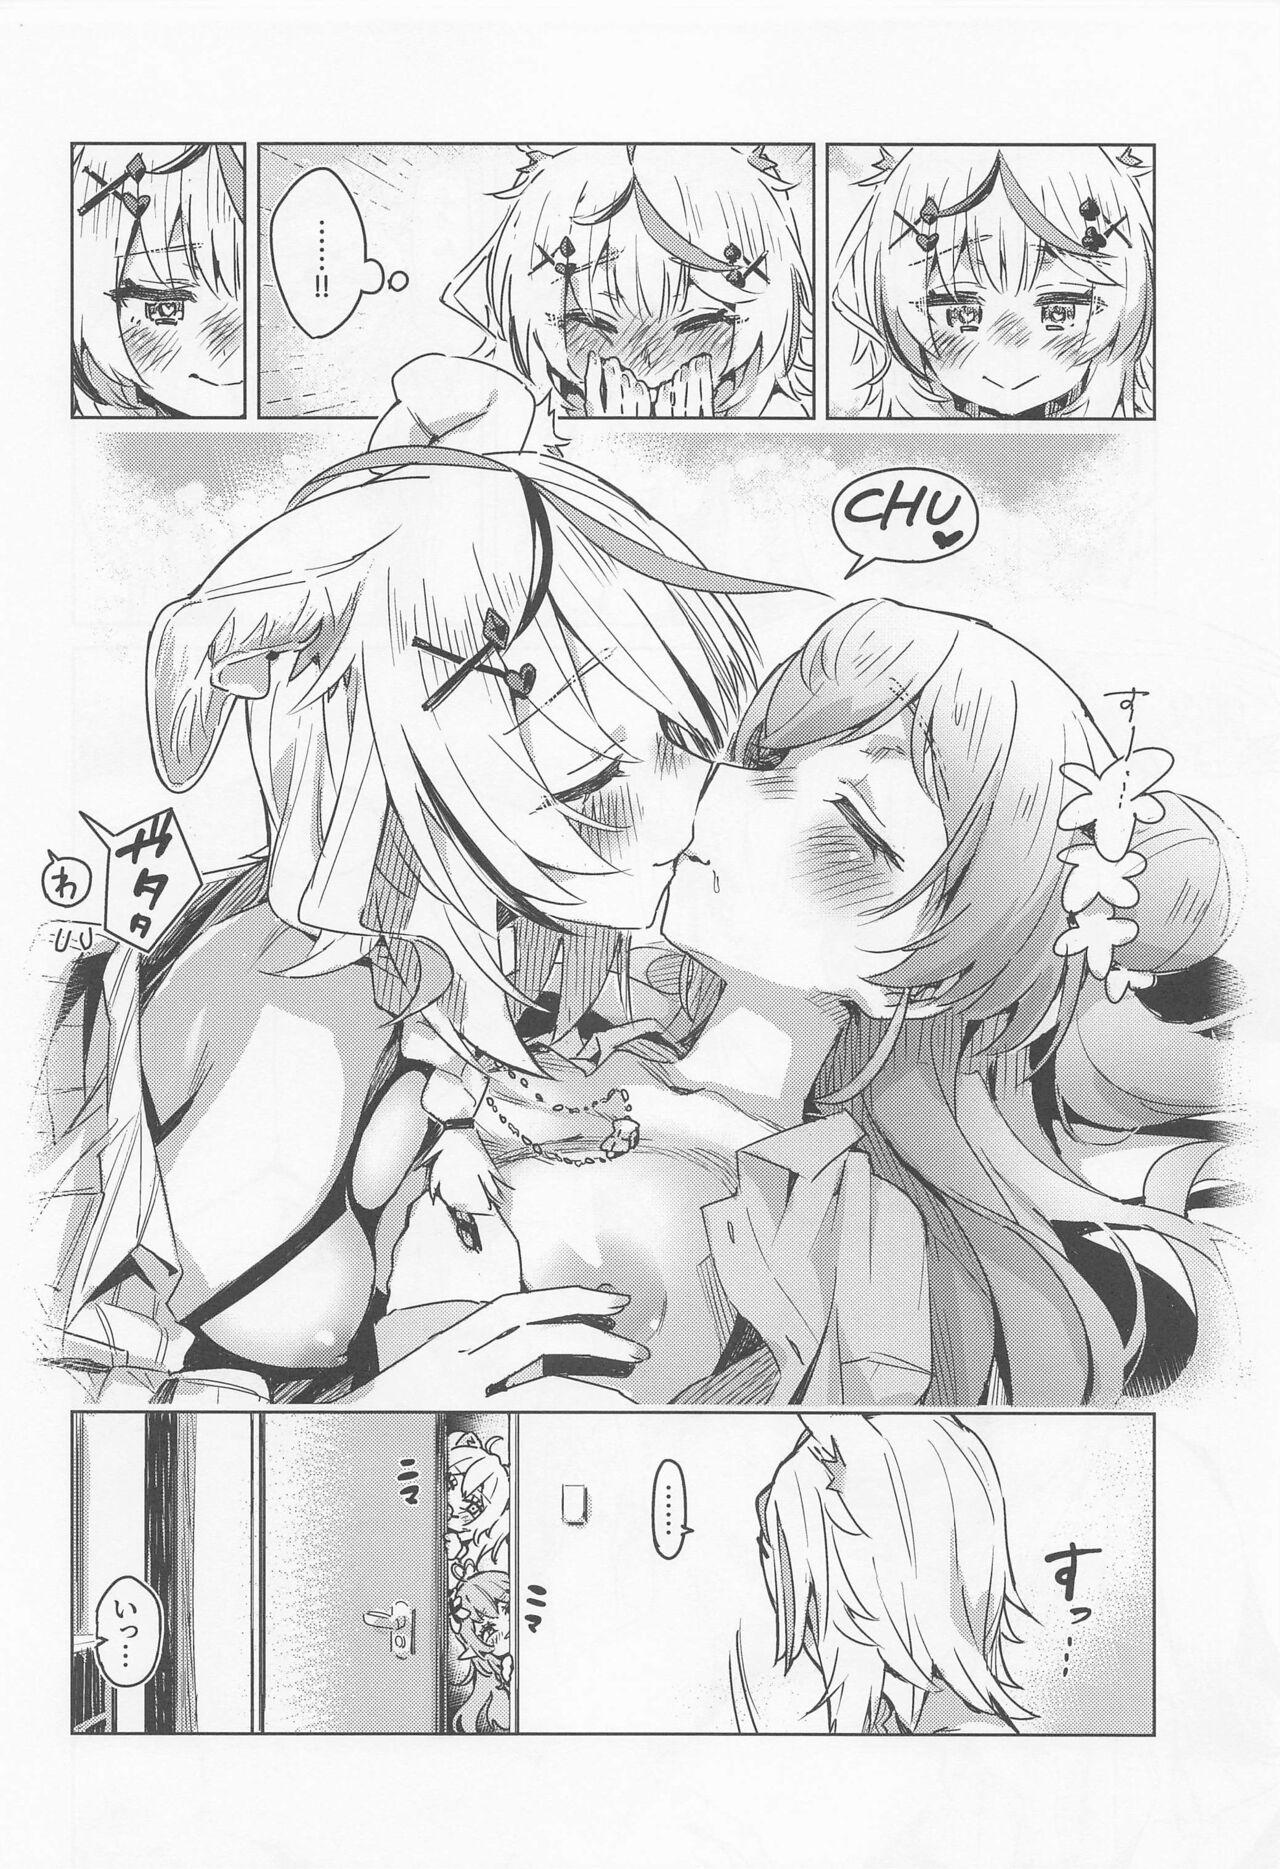 Fennec wa Iseijin no Yume o Miru ka - Does The Fennec Dream of The Lovely Visitor? 26